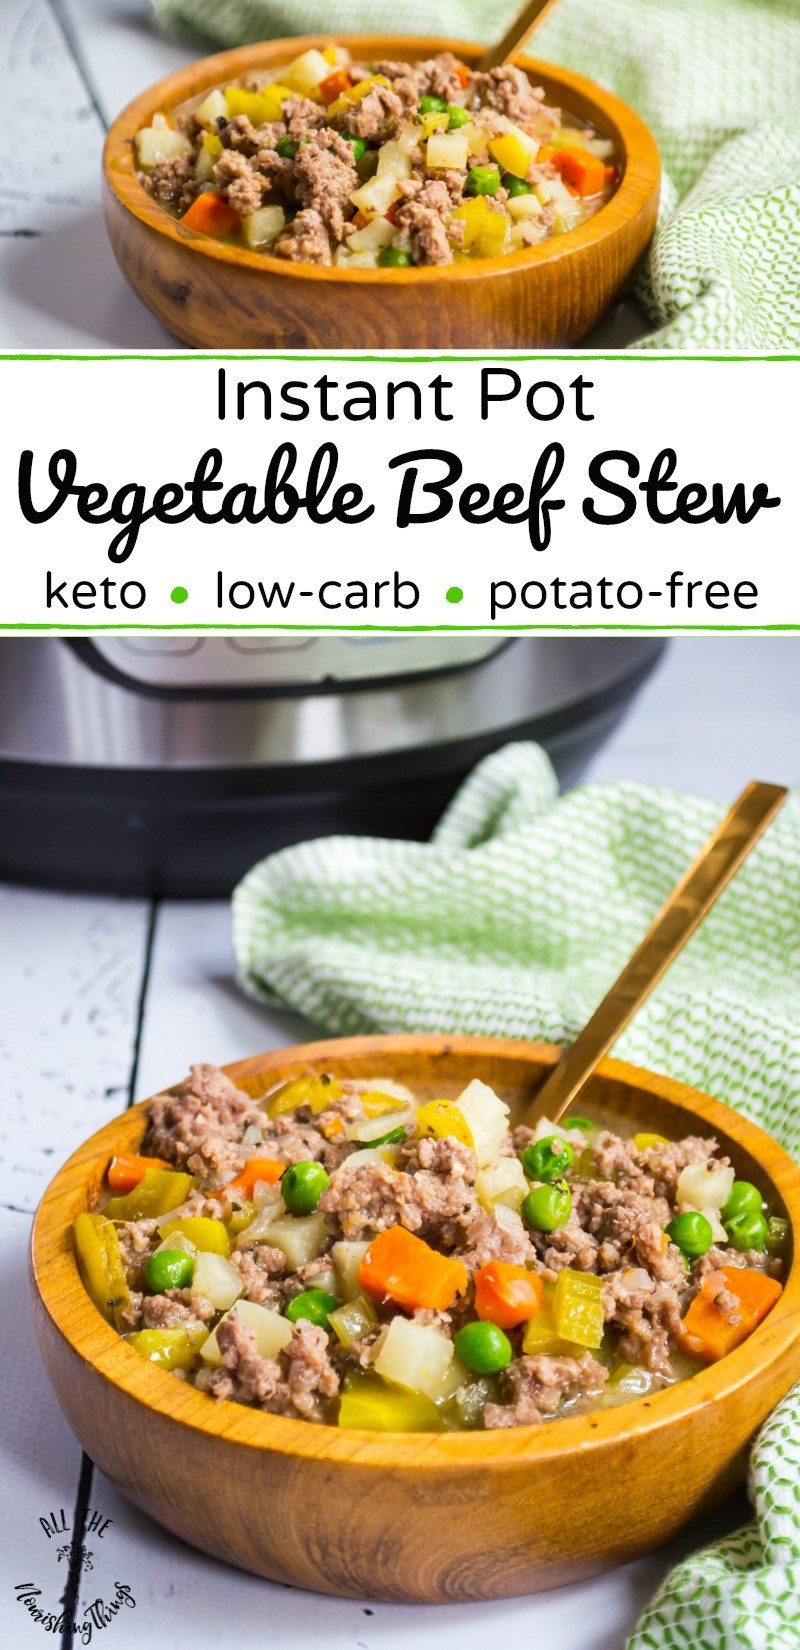 Ground Beef Keto Instant Pot Recipes
 Instant Pot Ve able Beef Stew keto Whole30 potato free